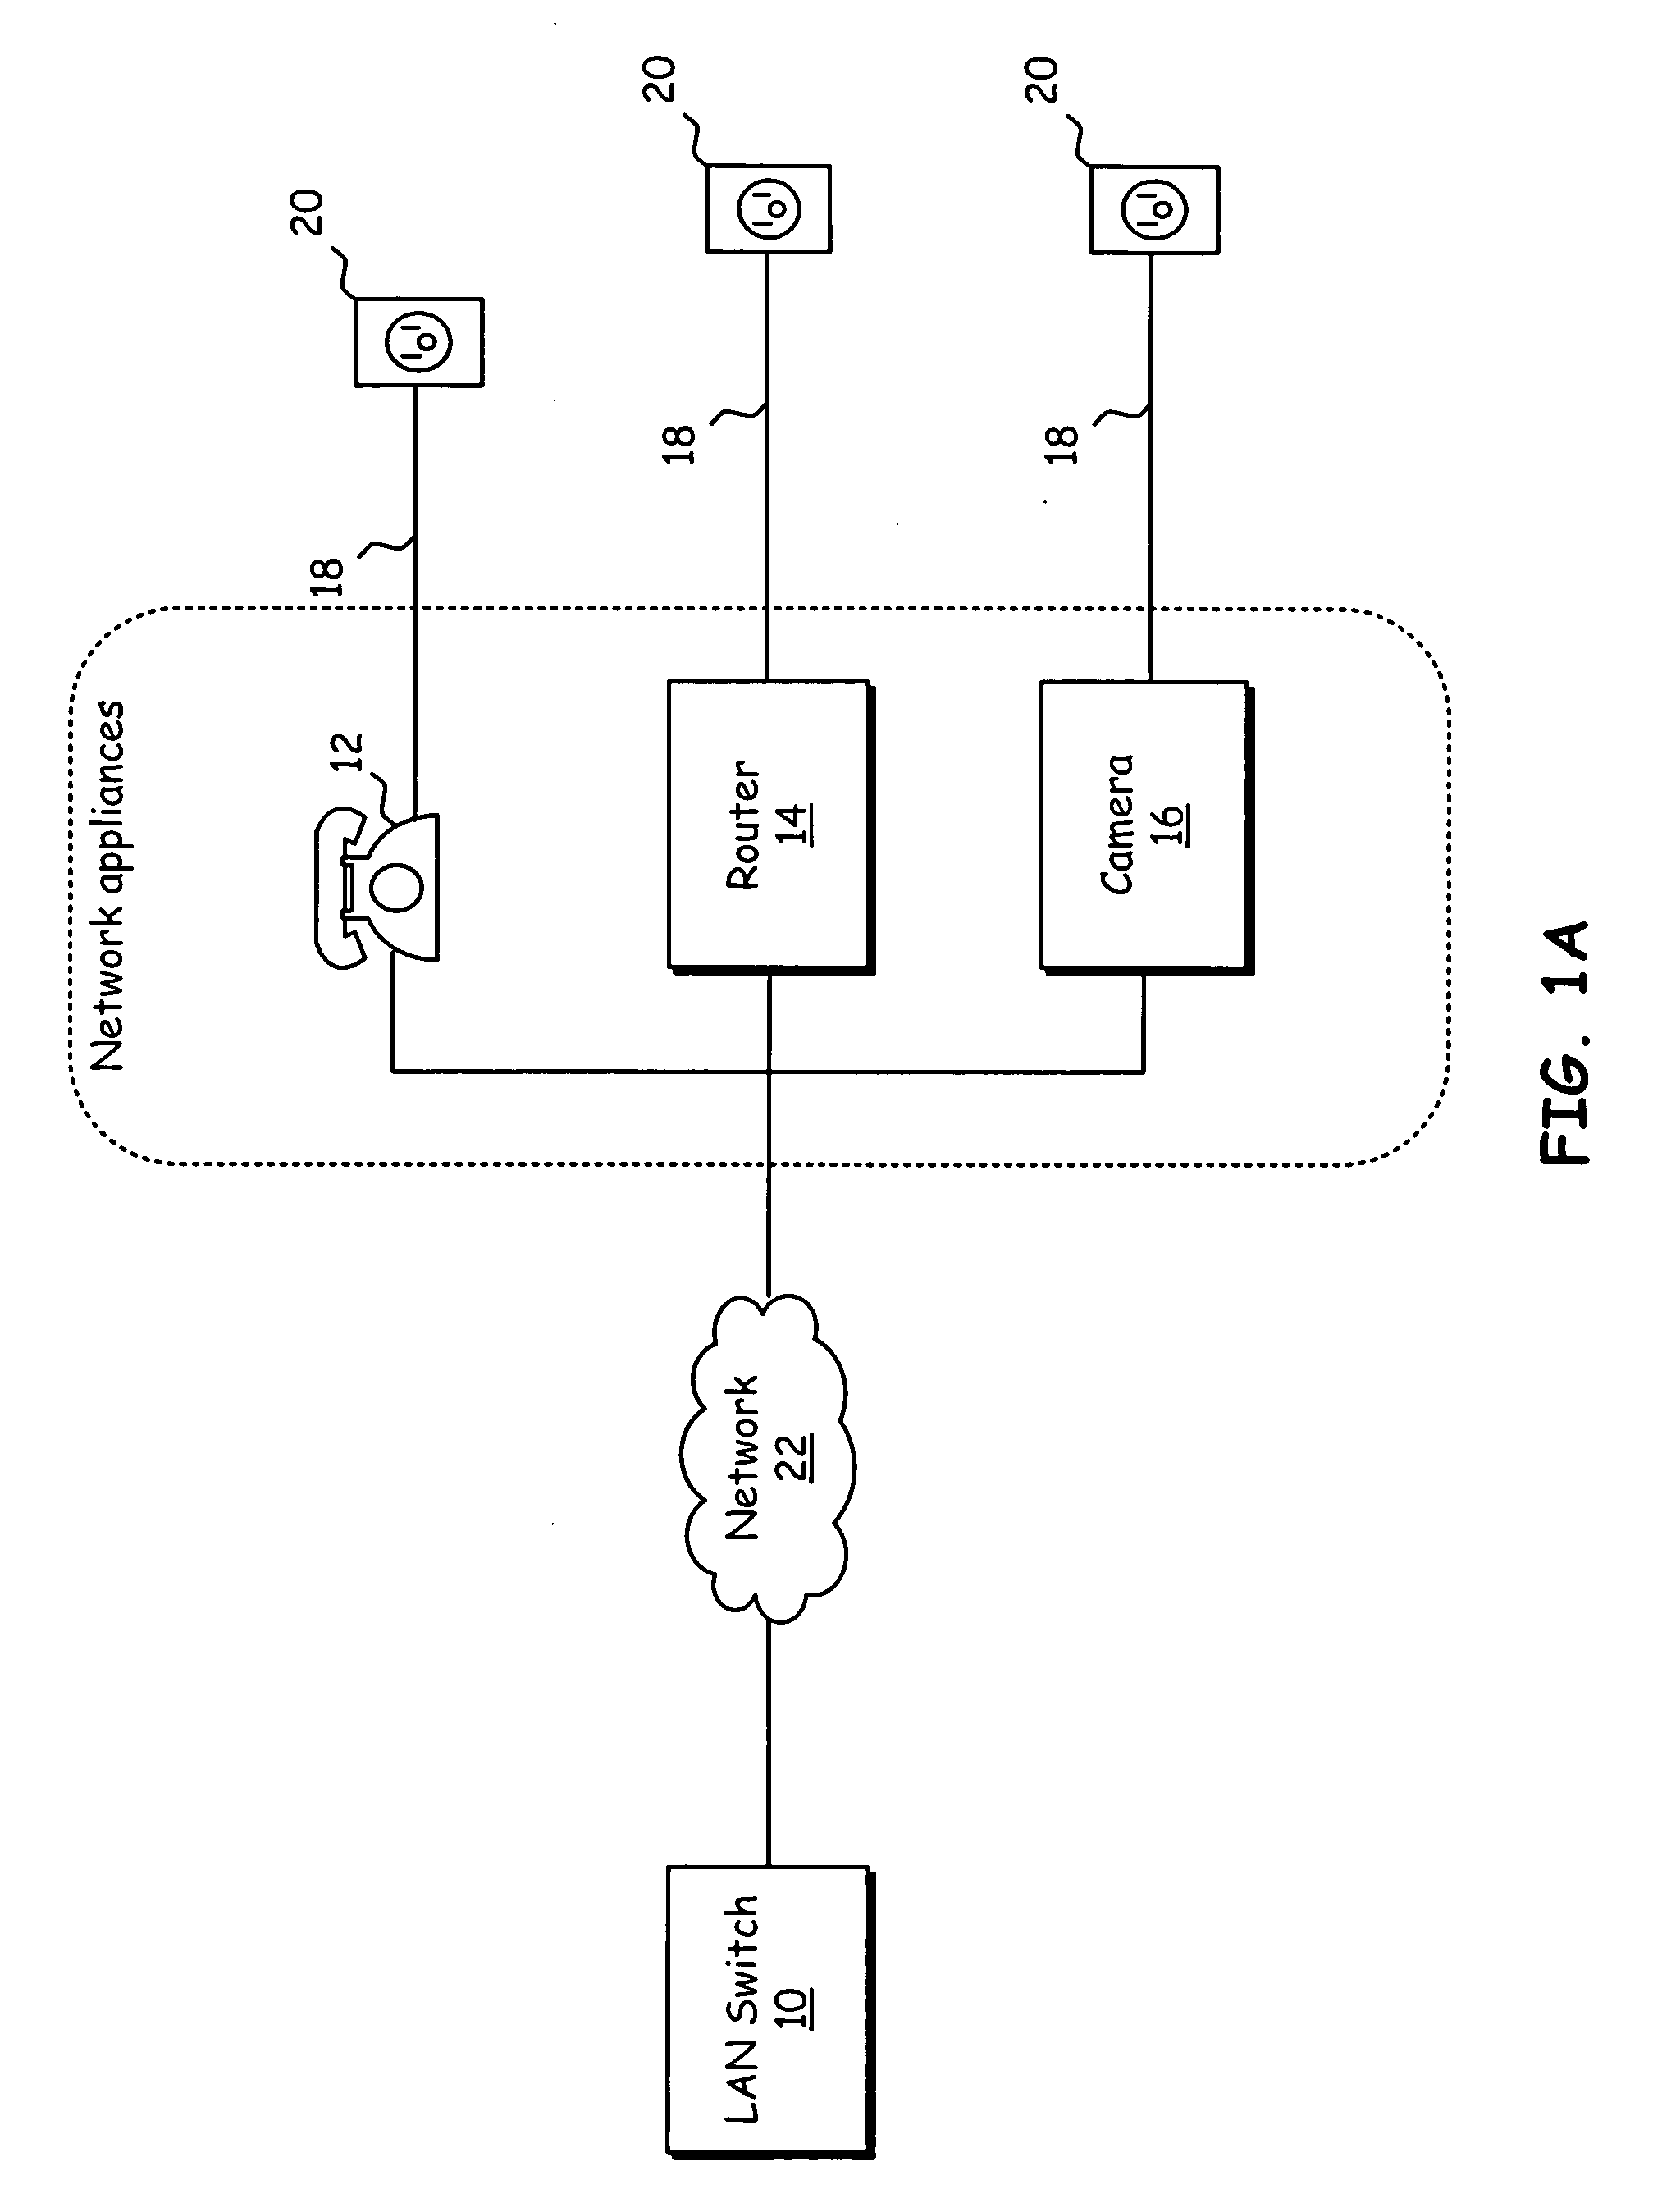 Method for improved ESD performance within power over ethernet devices